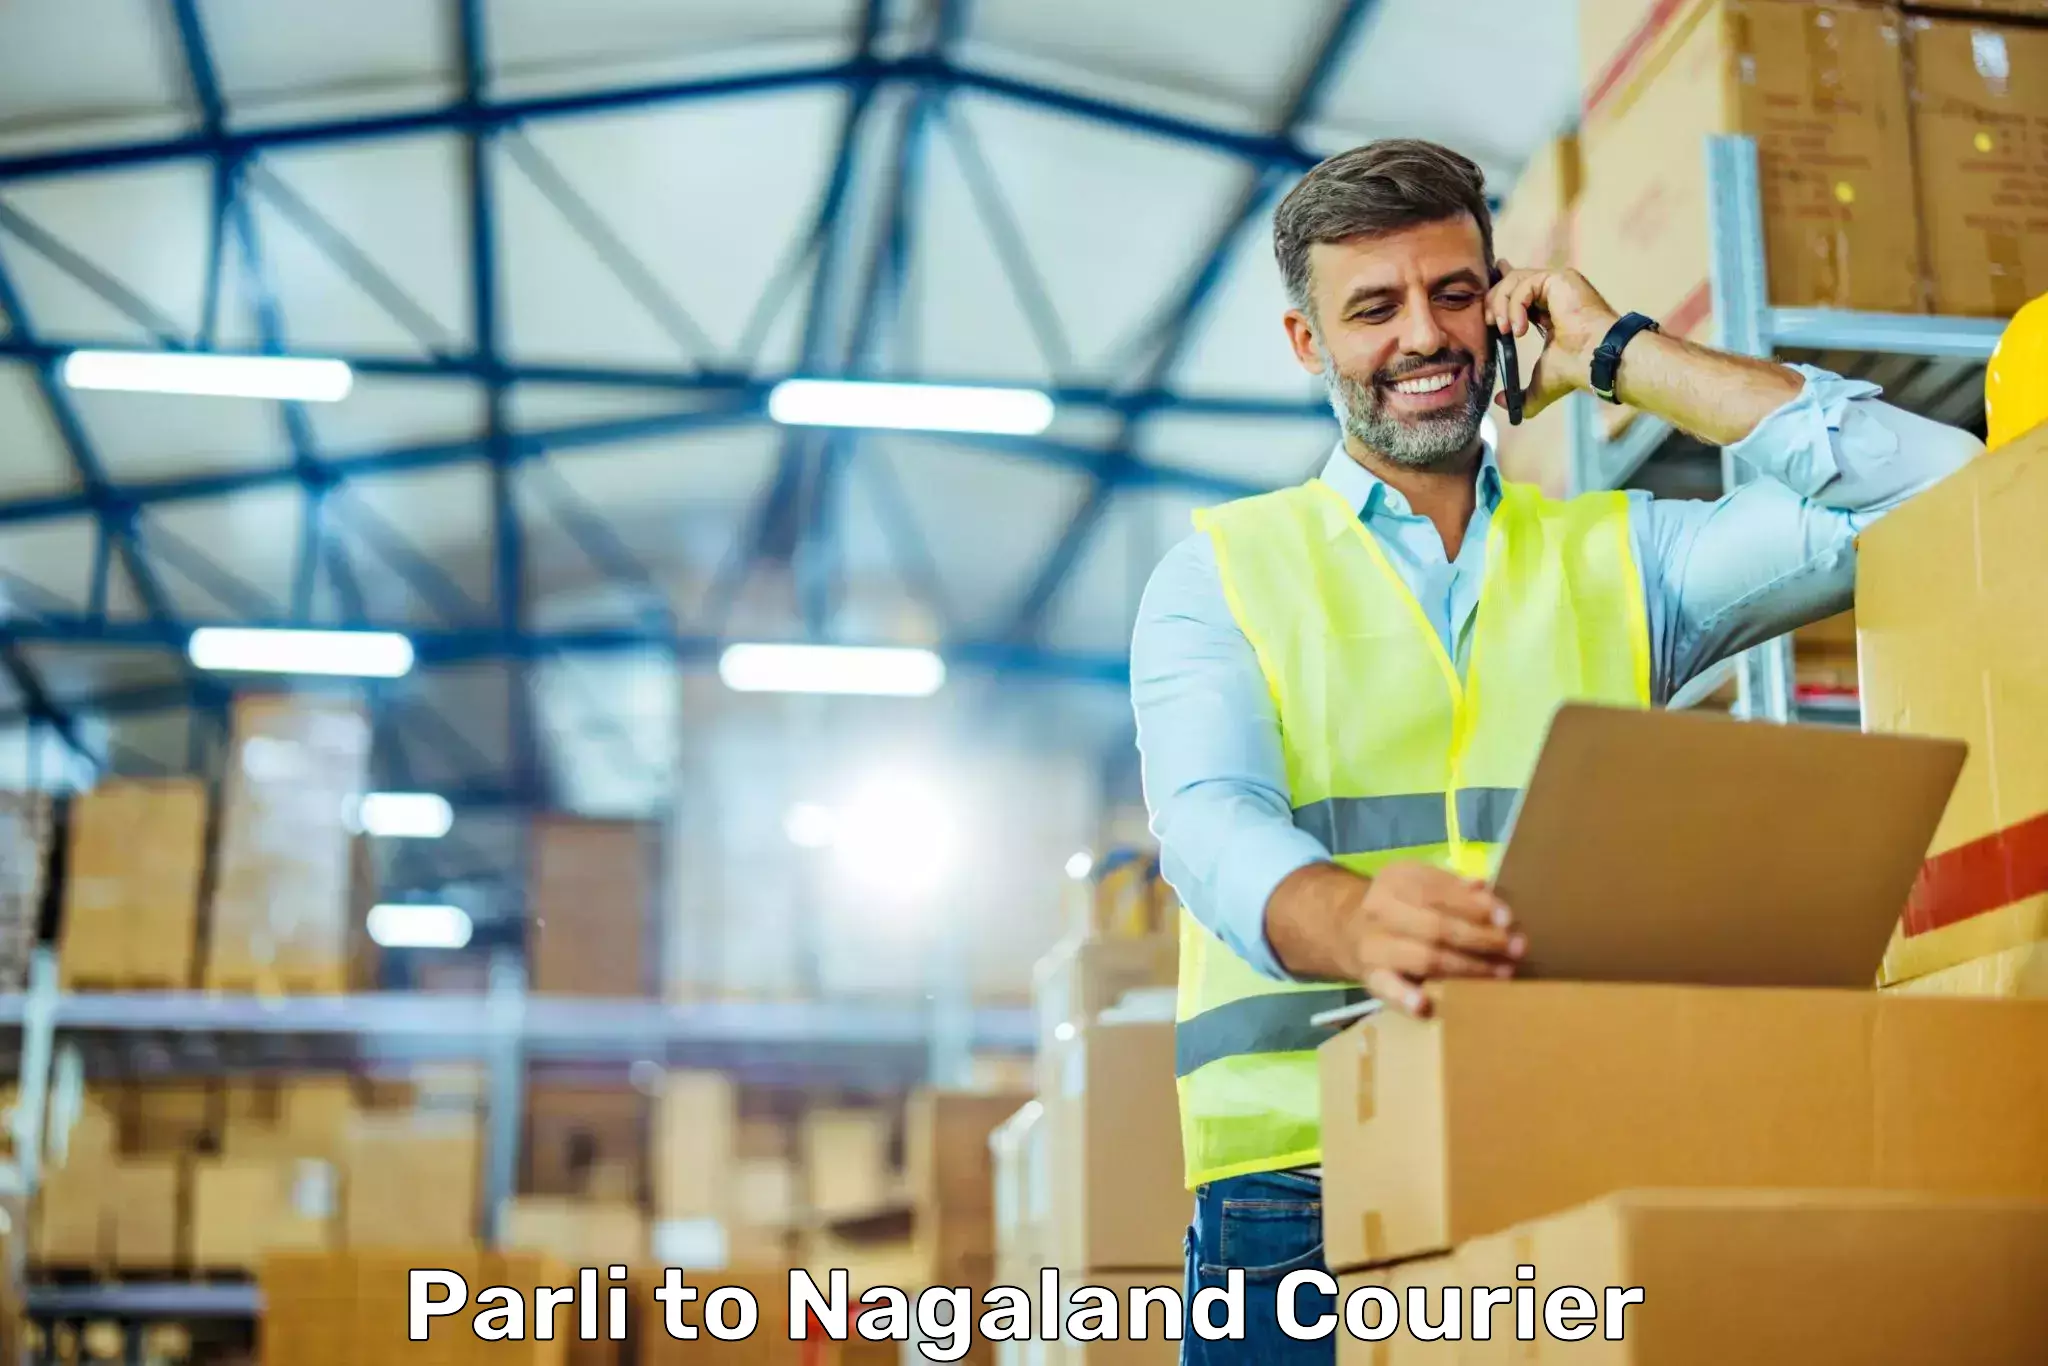 Cash on delivery service Parli to Nagaland